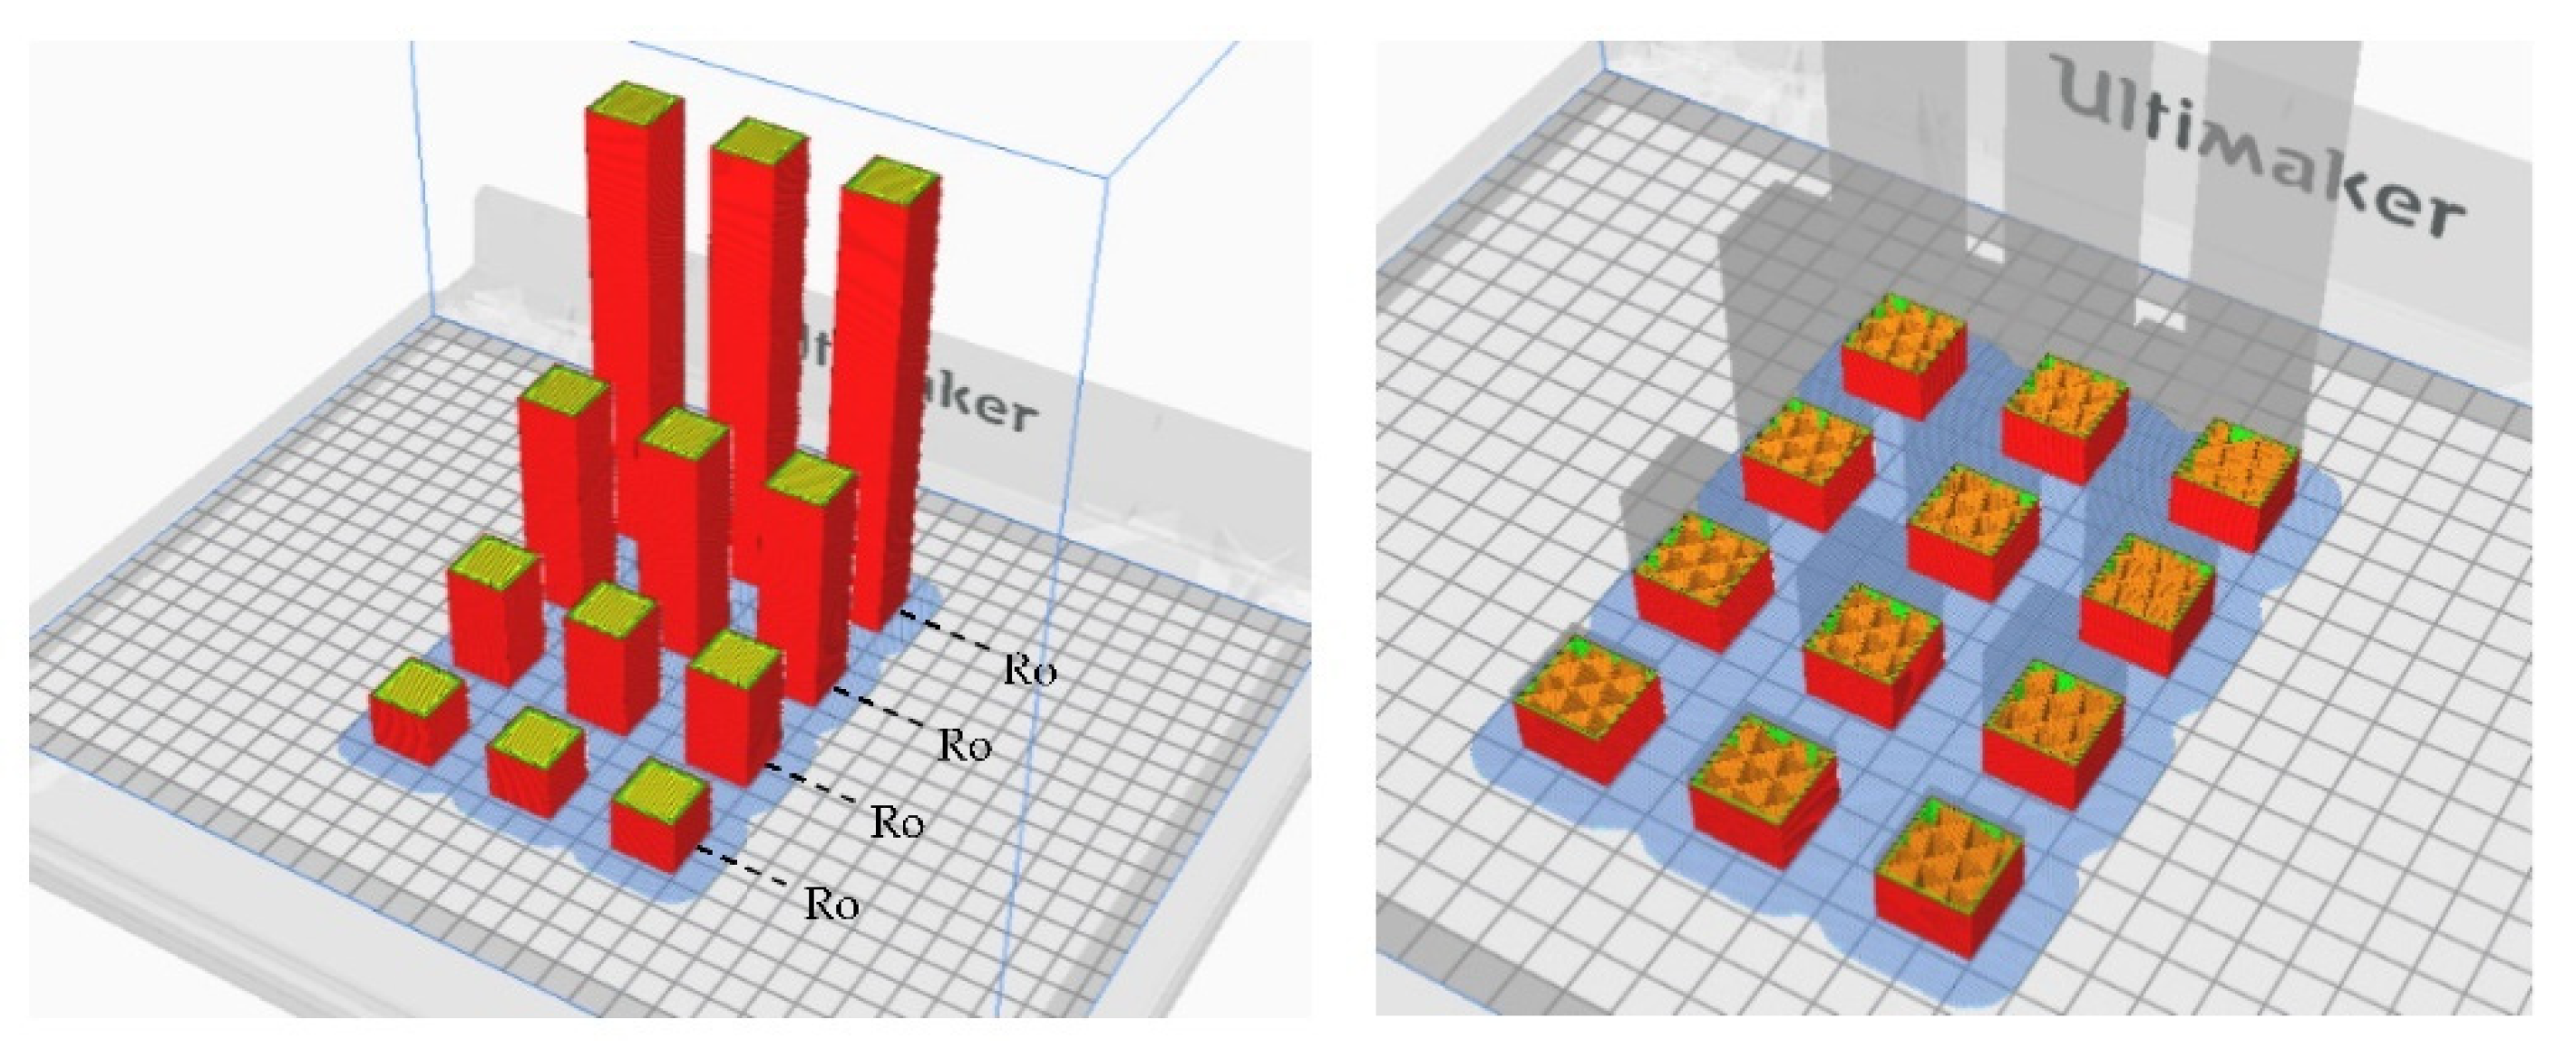 Buildings | Free Full-Text | Dimensional Stability of 3D Printed Objects from Plastic Using FDM: Potential Construction Applications